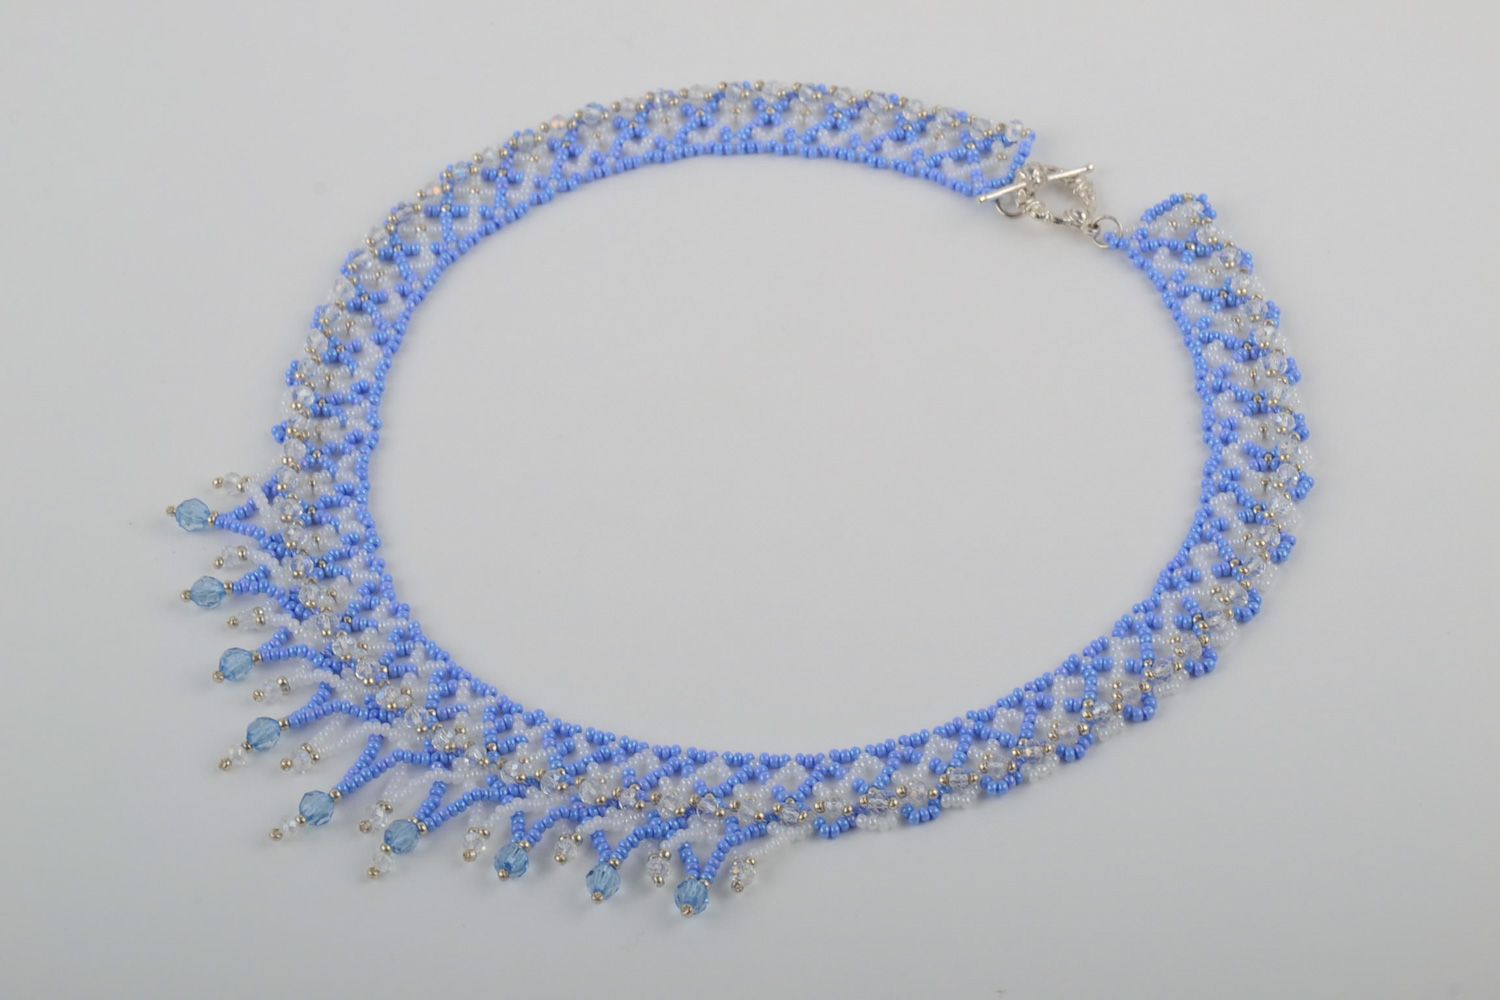 Handmade women's beaded necklace with charms of blue color photo 1